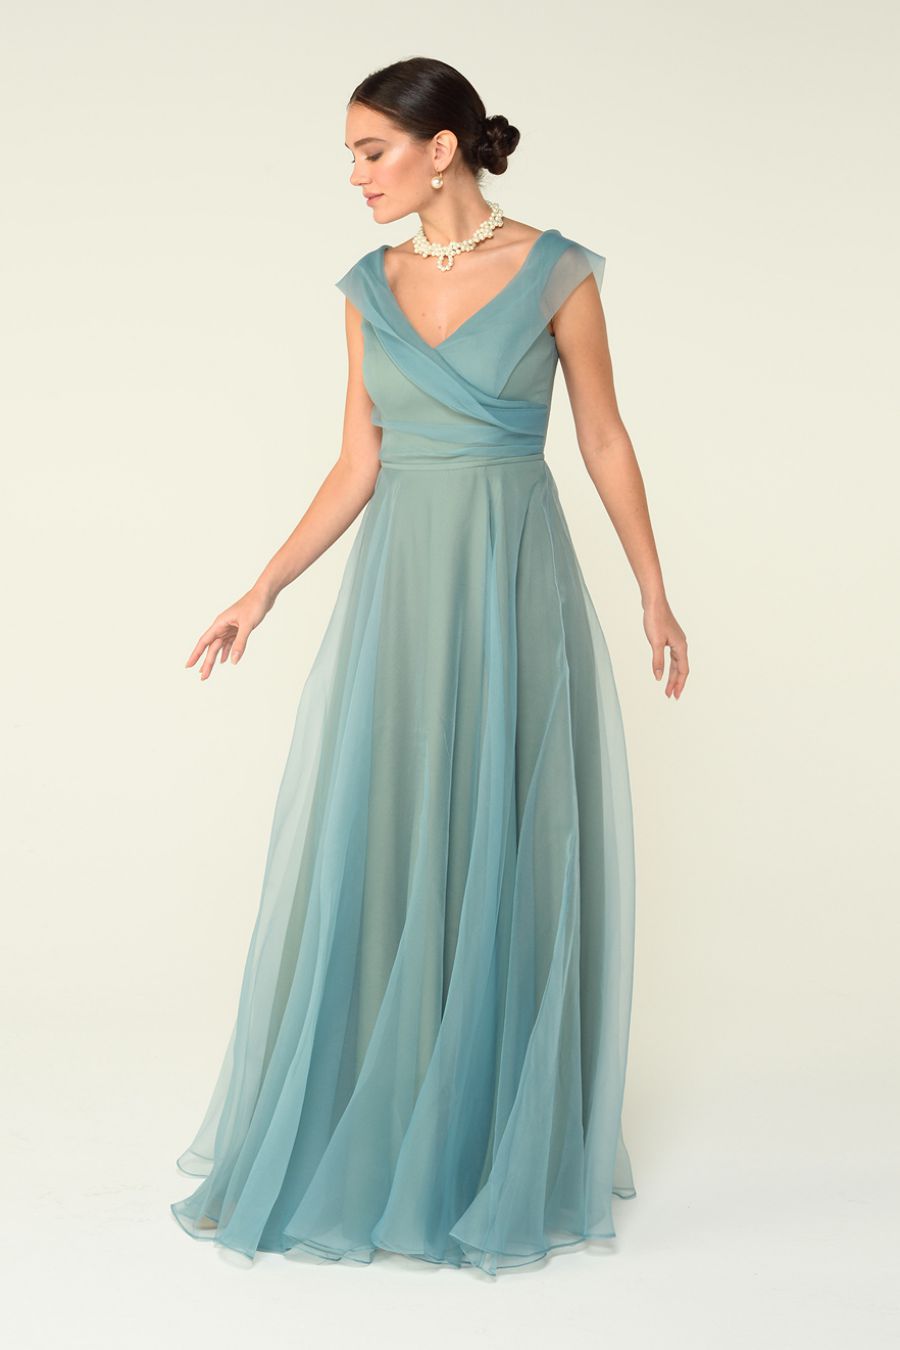 Nour - Mystic Evenings | Evening and Prom Dresses